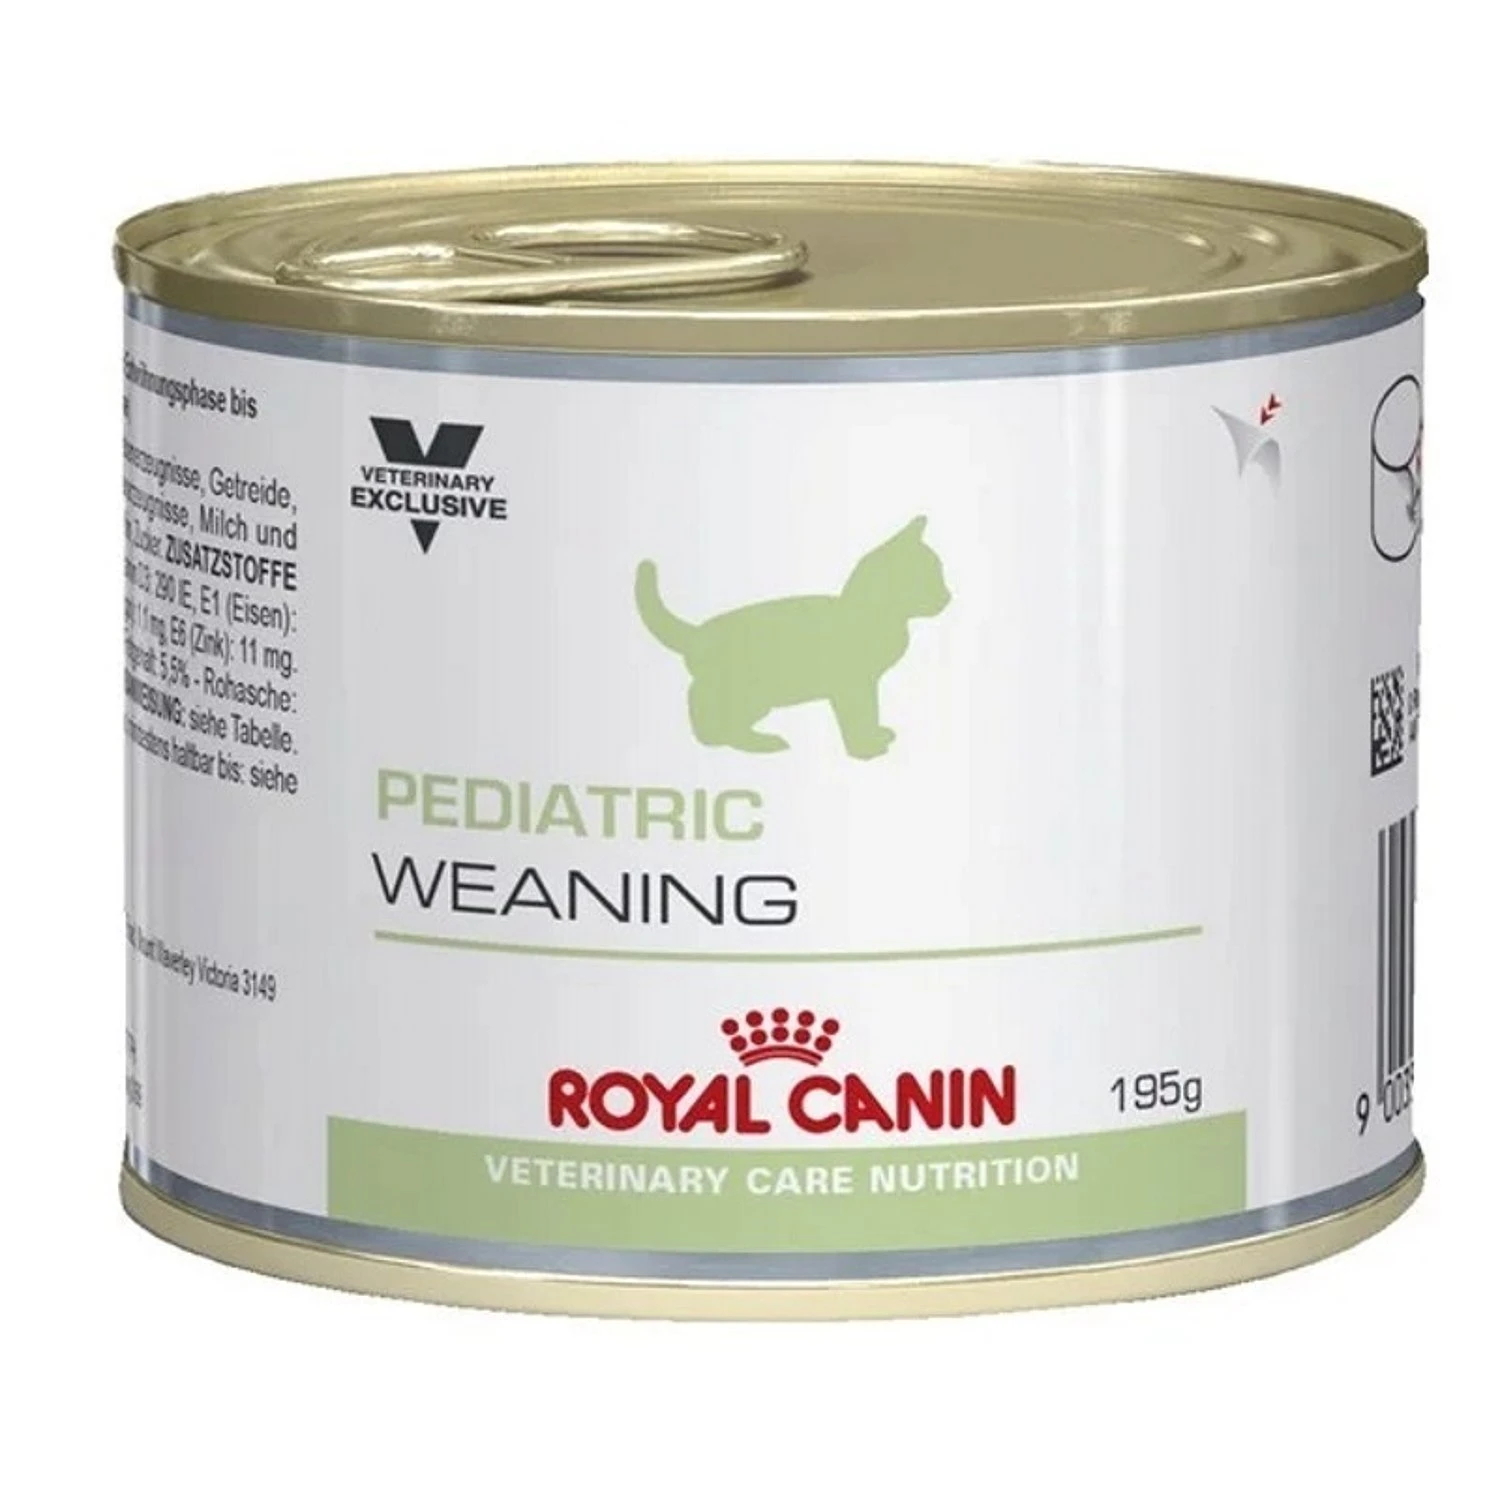 Broederschap Vergadering moersleutel Feed for kittens Royal Canin pediatric Wenning 0.195 kg in 2 stages of  growth|Cat Dry Food| - AliExpress